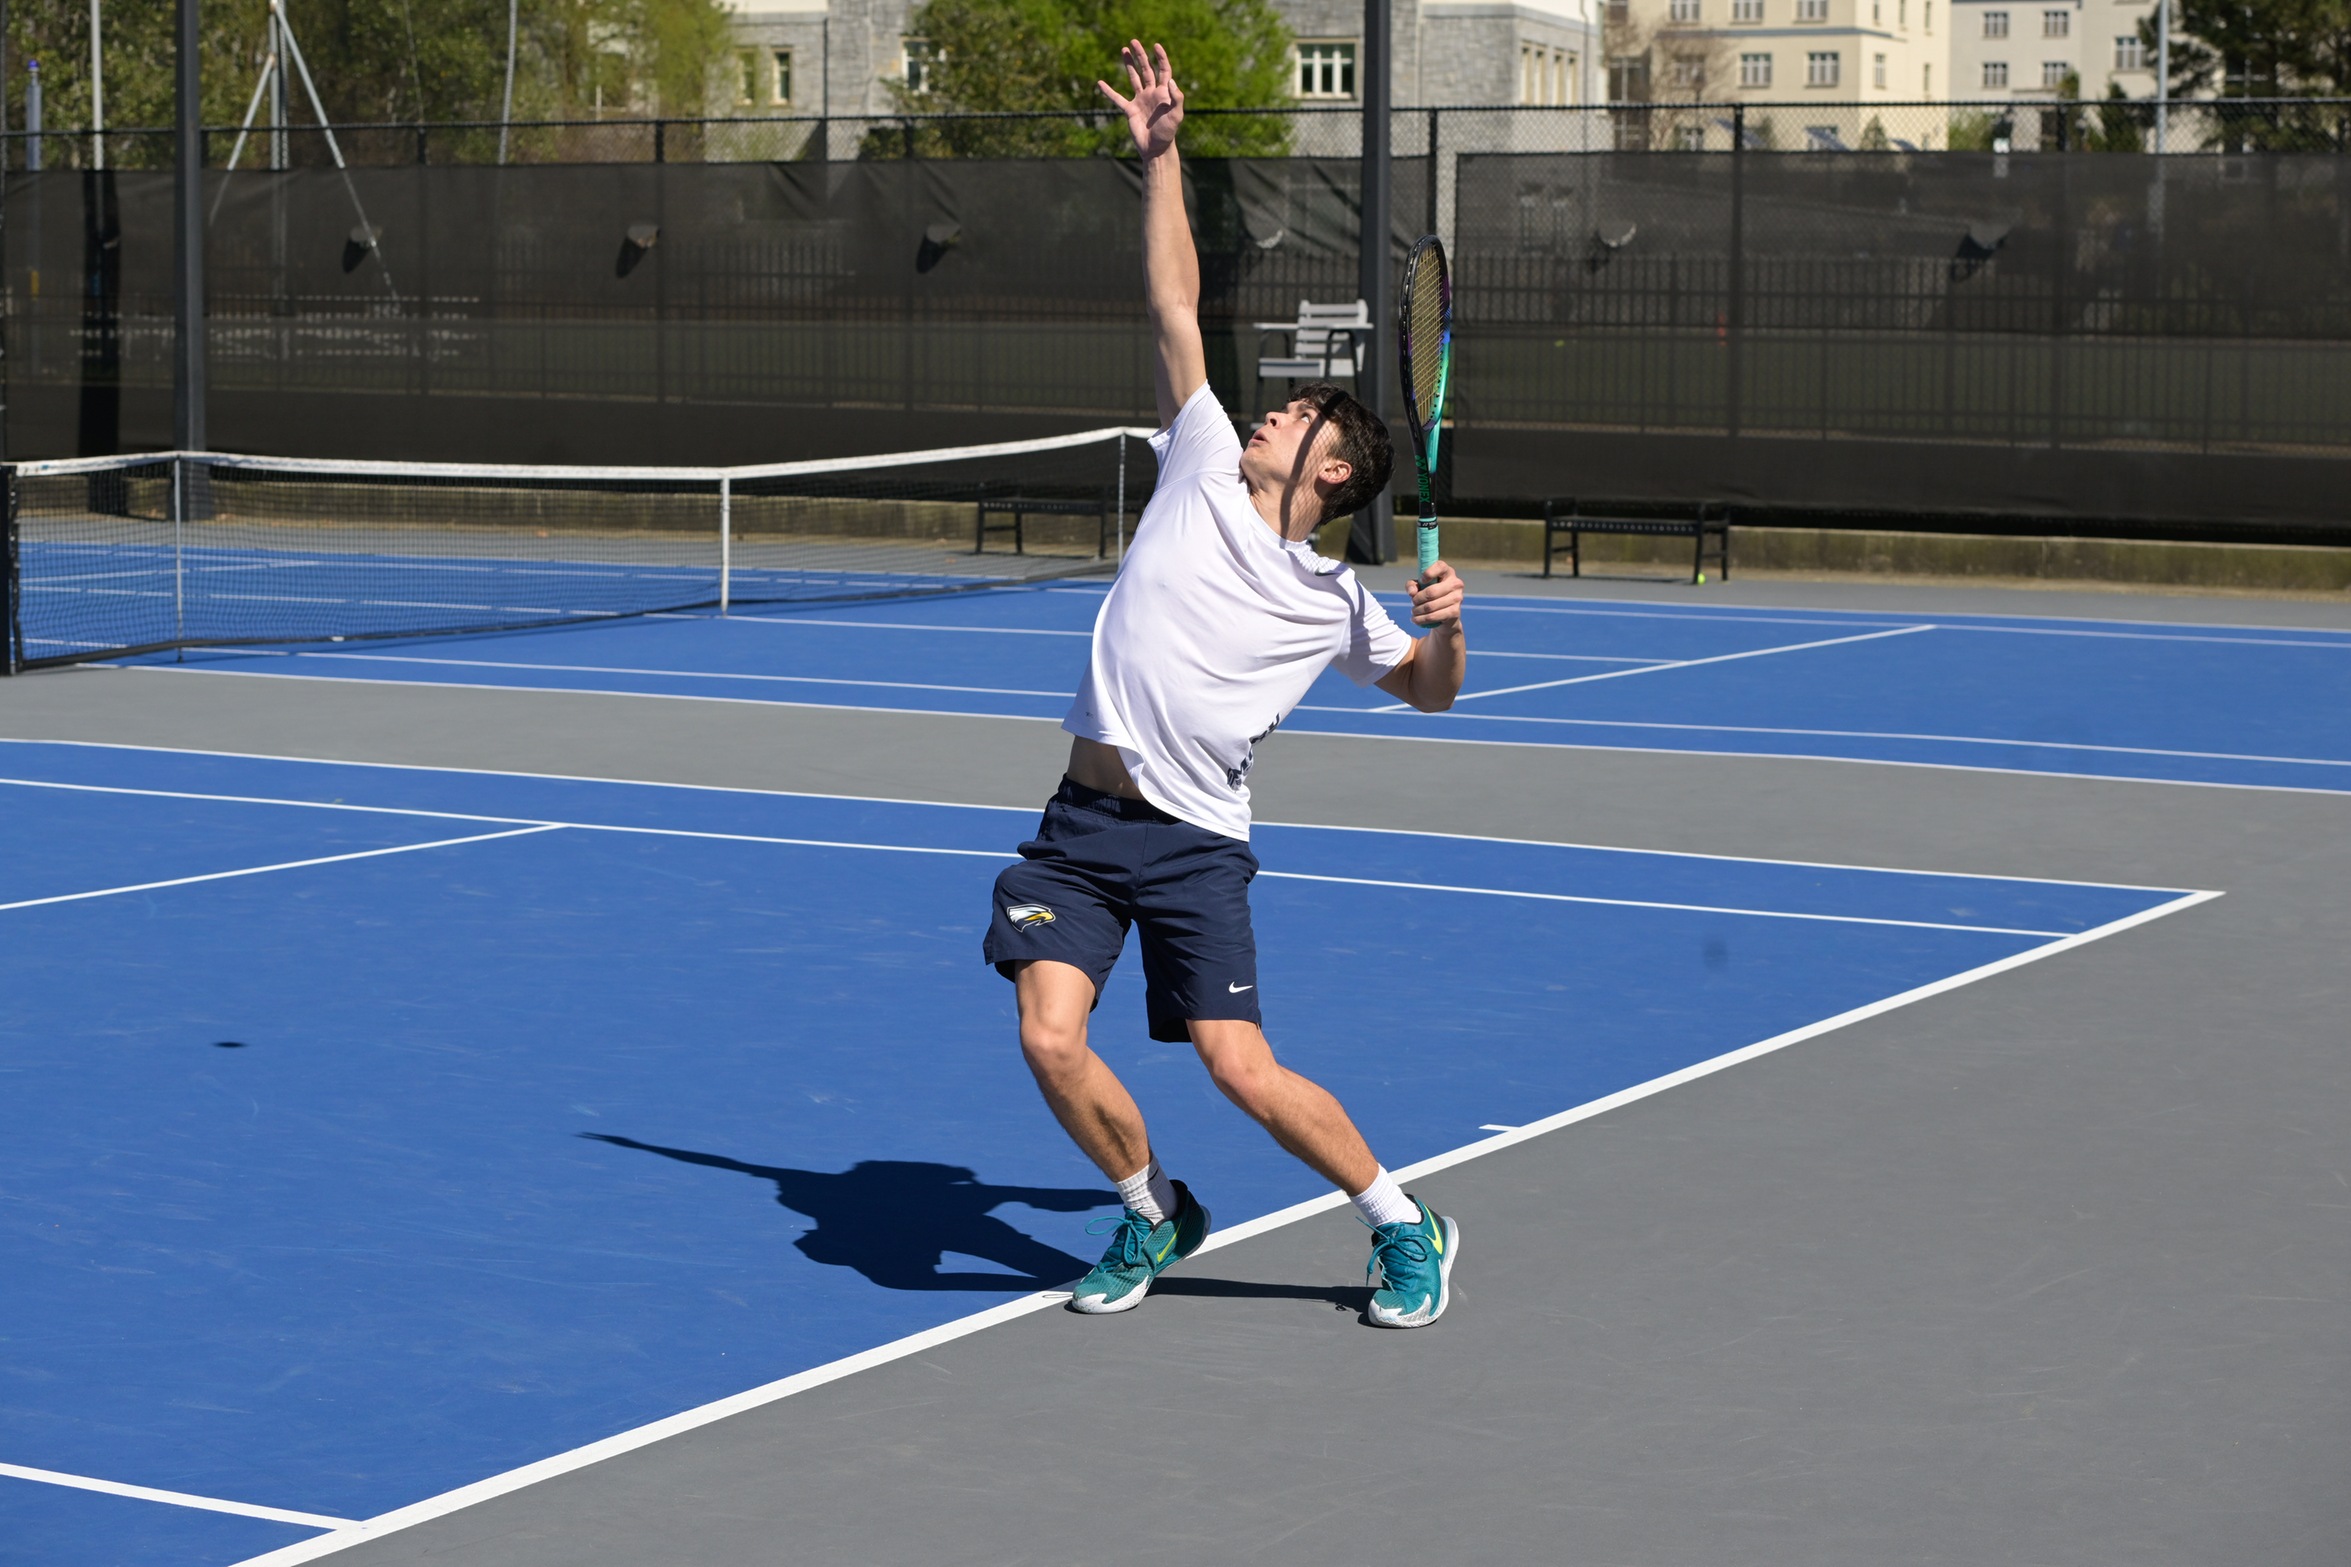 UAA Run Ends in Semifinals for Emory Men's Tennis